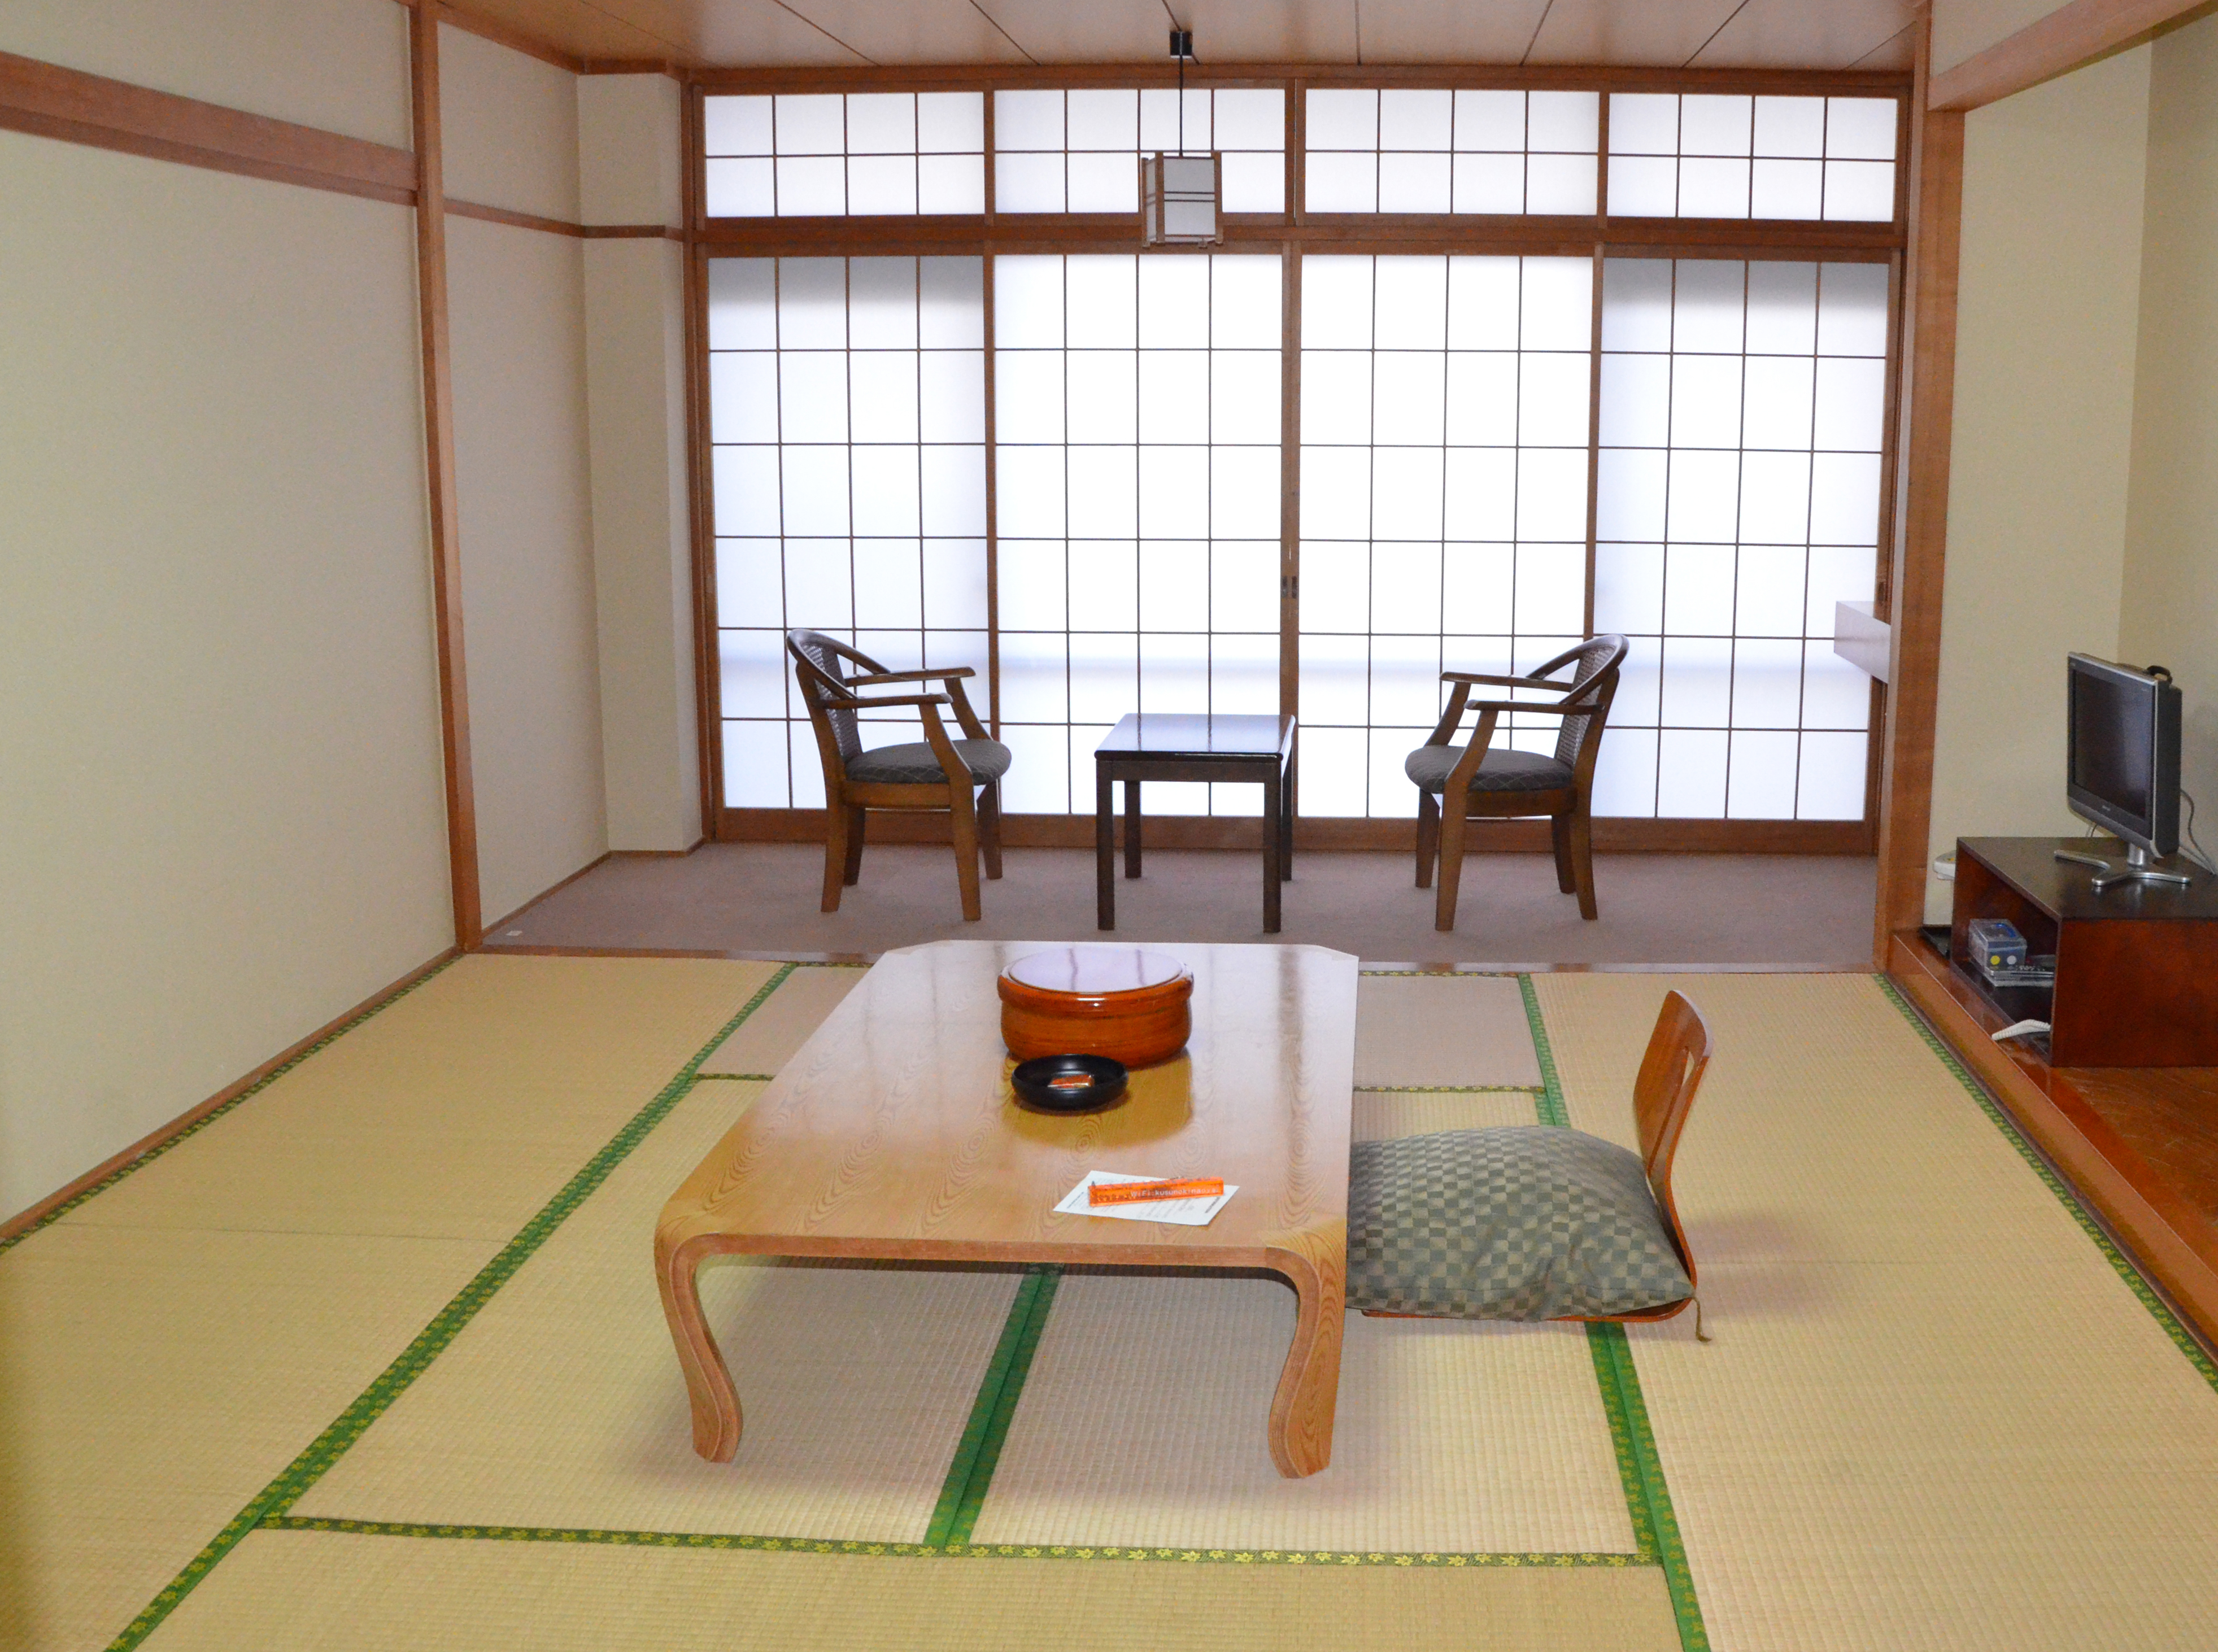 experience-ultime-ryokan-hebergement-traditionnel-japonais-maxitrips